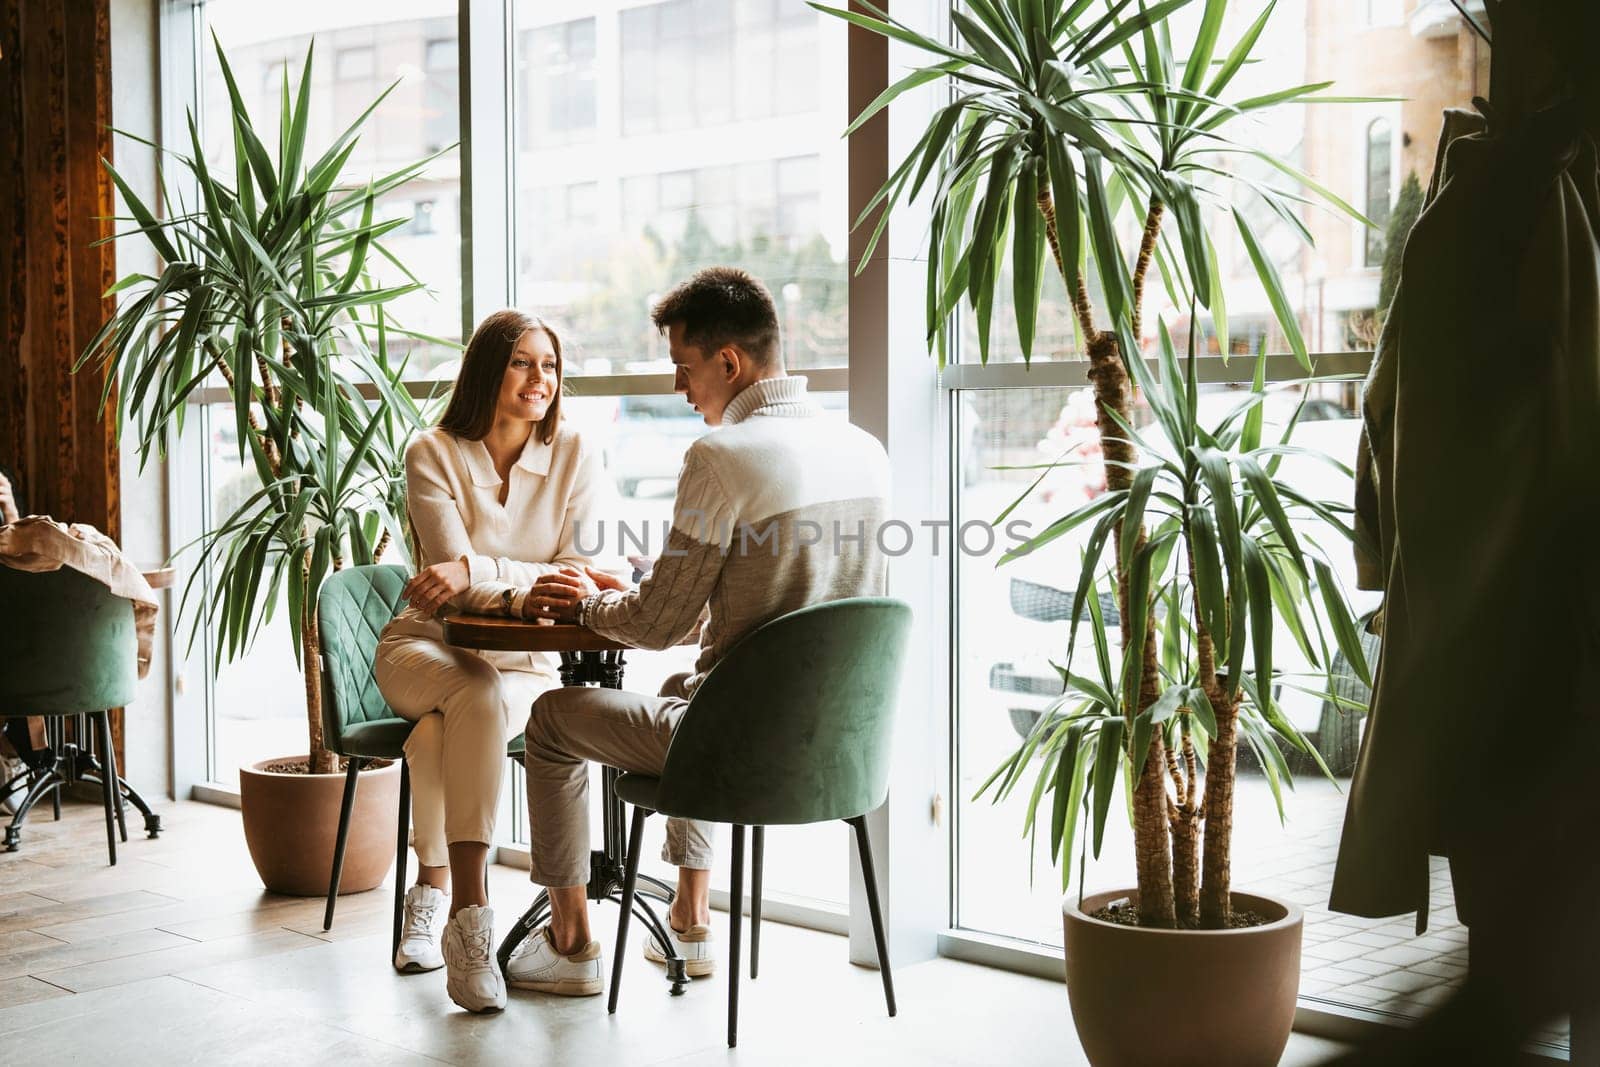 A man and a woman are seated across from each other in a sunlit cafe, holding hands and gazing into each others eyes, creating a moment of intimacy. The setting exudes warmth and tranquility, with indoor plants contributing to the serene atmosphere.